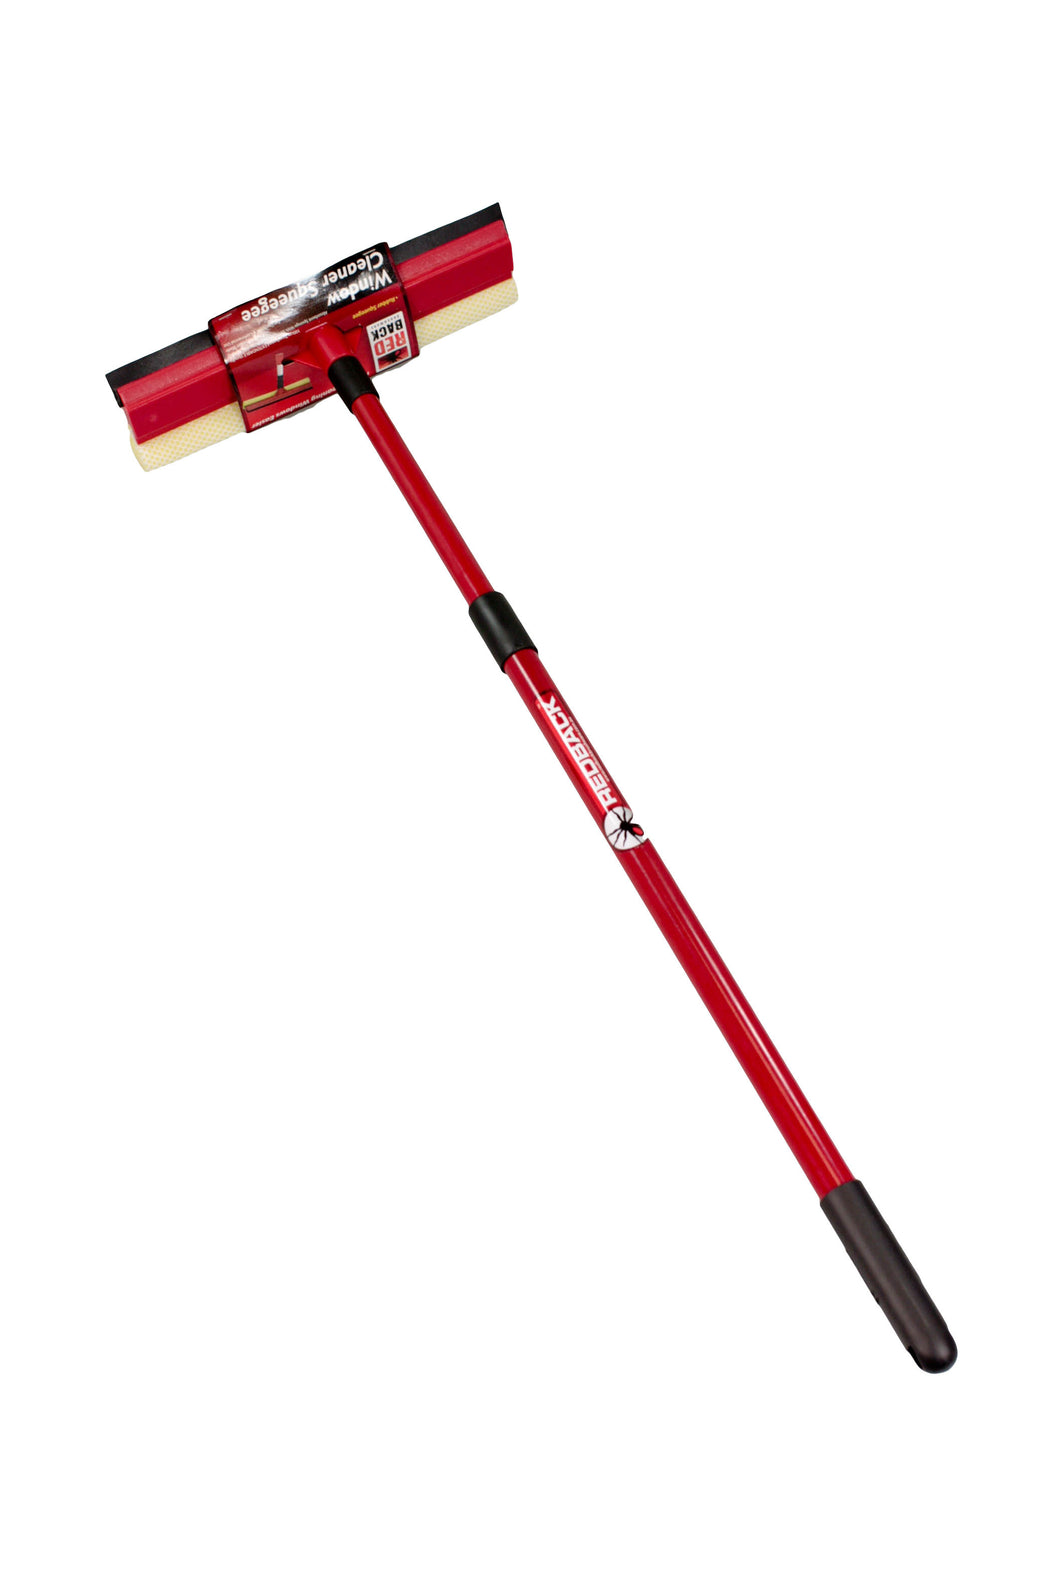 Window Cleaner Squeegee with 1m Extendable Handle Redback